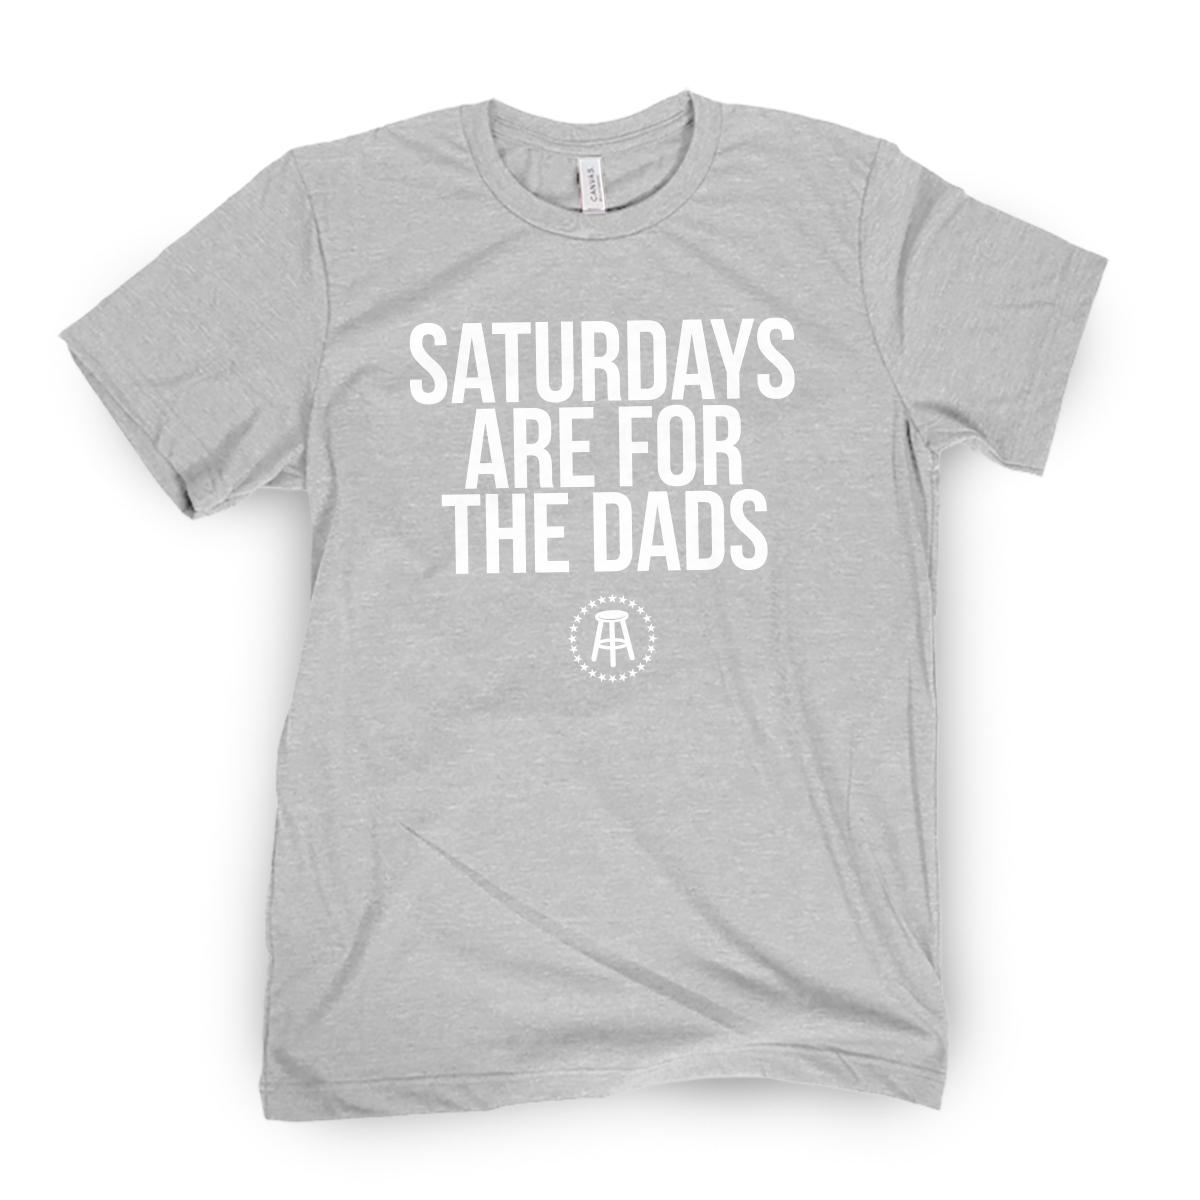 Saturdays Are For The Dads II Tee